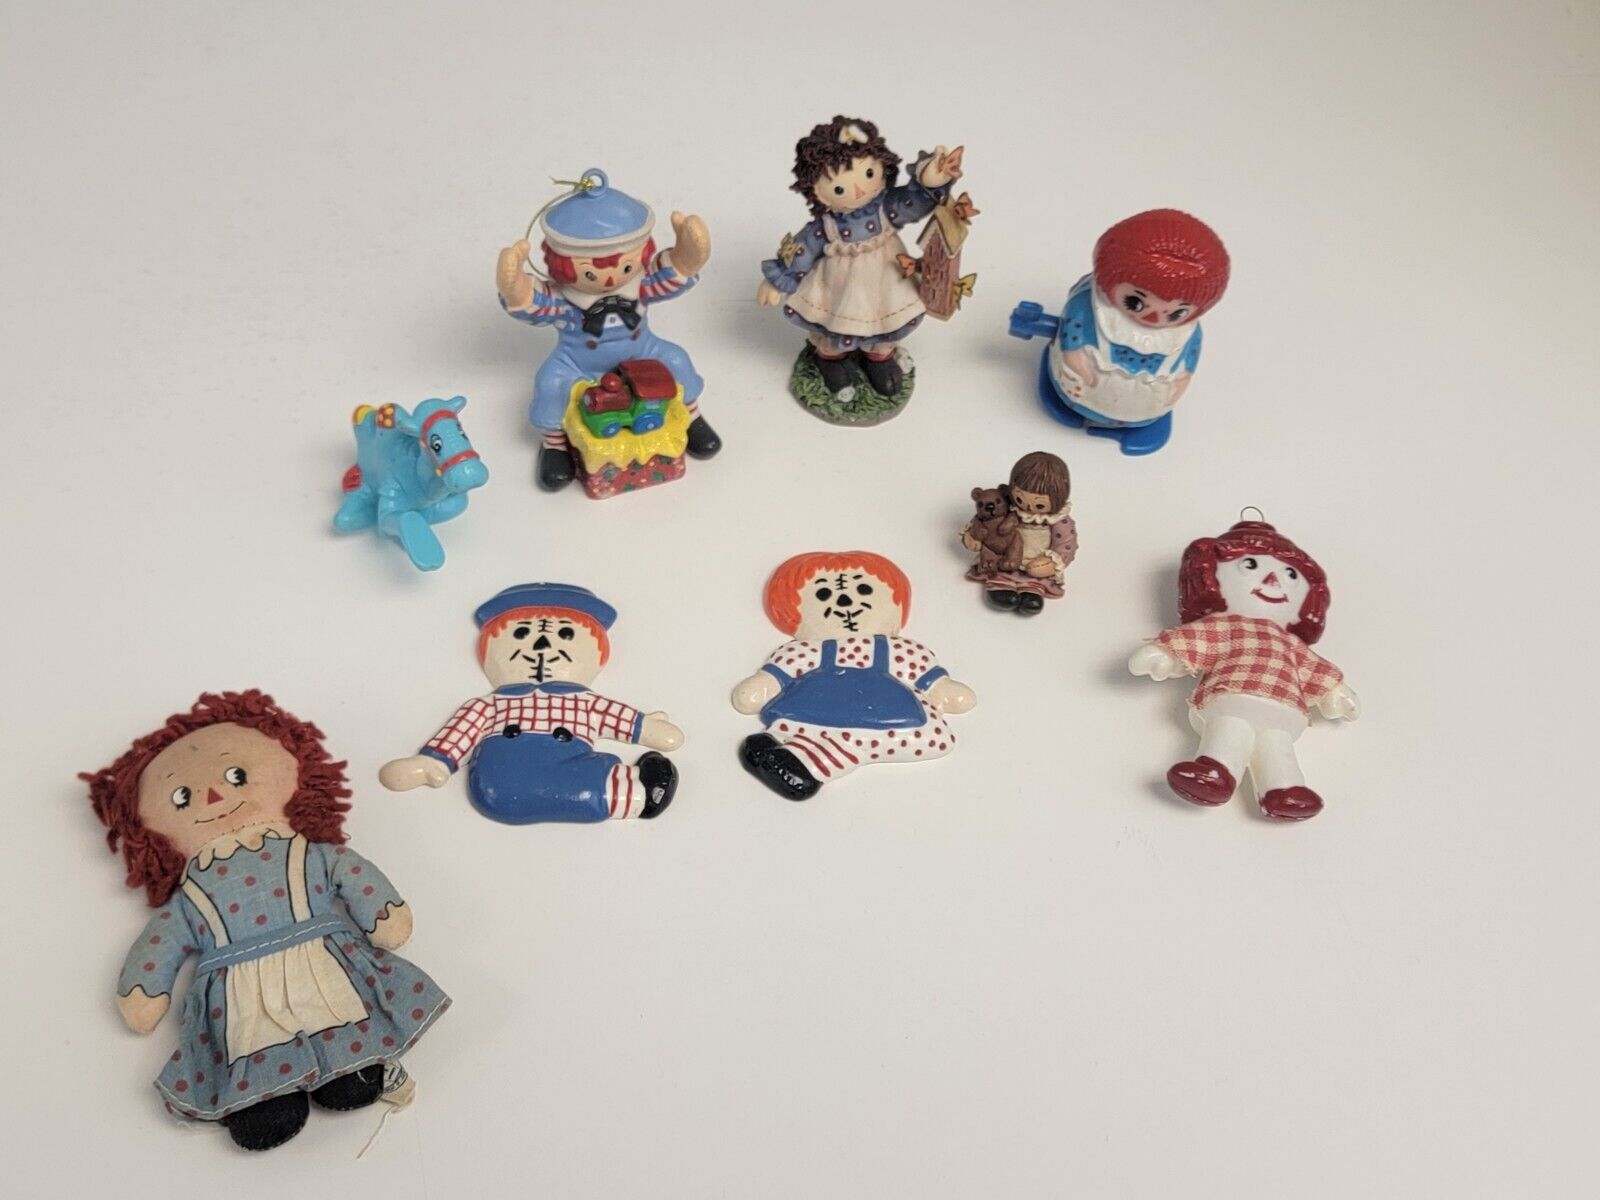 Raggedy Ann and Andy Figurine / Doll Lot of 9 Rare Wind Up Plastic Resin